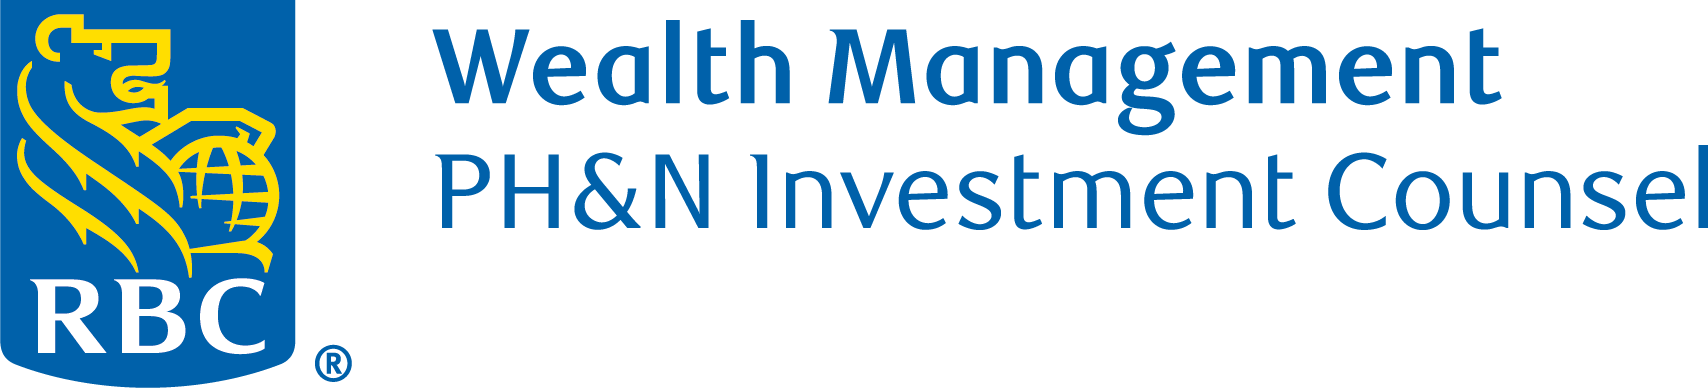 RBC Wealth Management - PH&N Investment Counsel